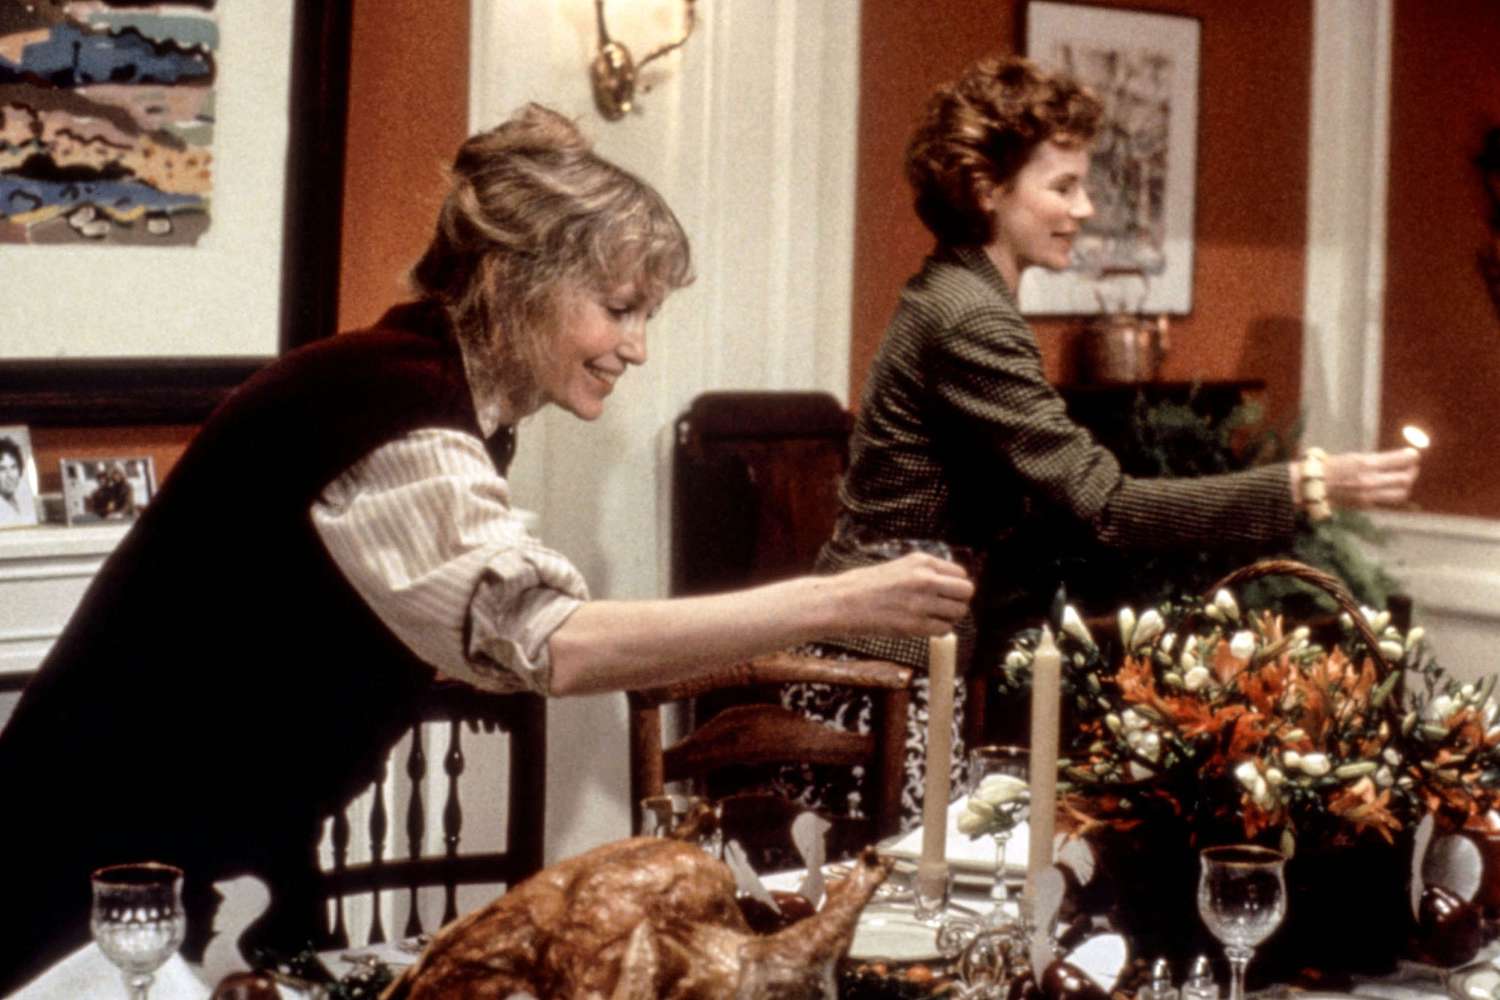 Mia Farrow and Dianne Wiest in 'Hannah and Her Sisters'